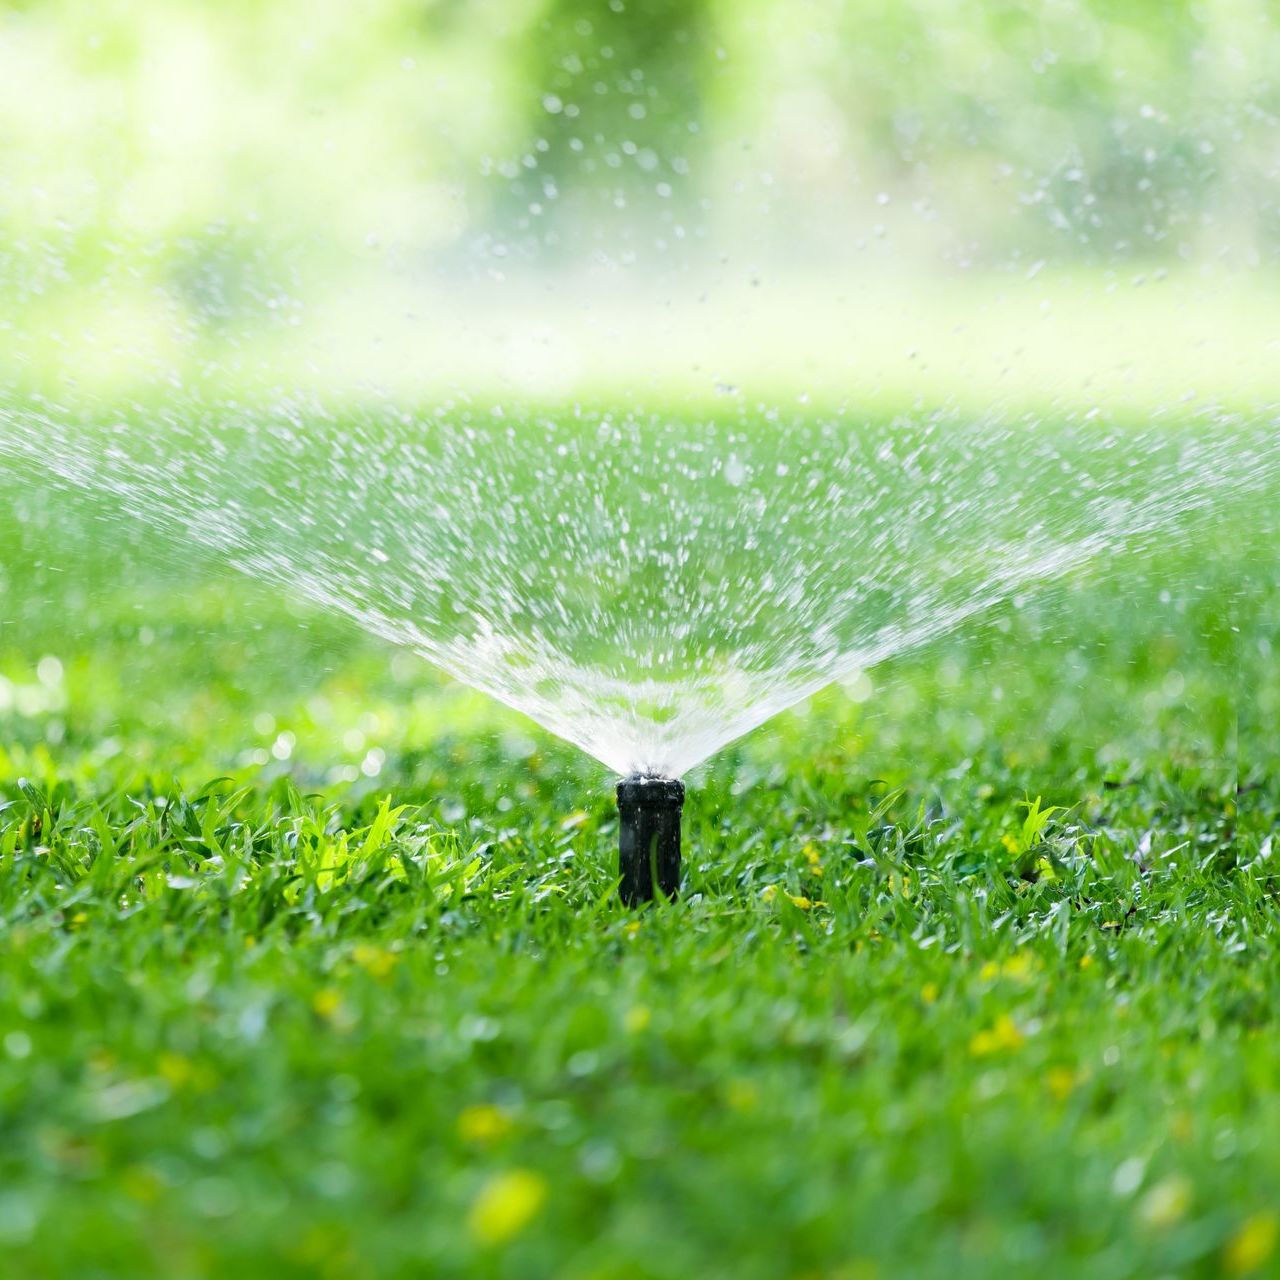 a sprinkler spraying water in a garden with a bench in the background